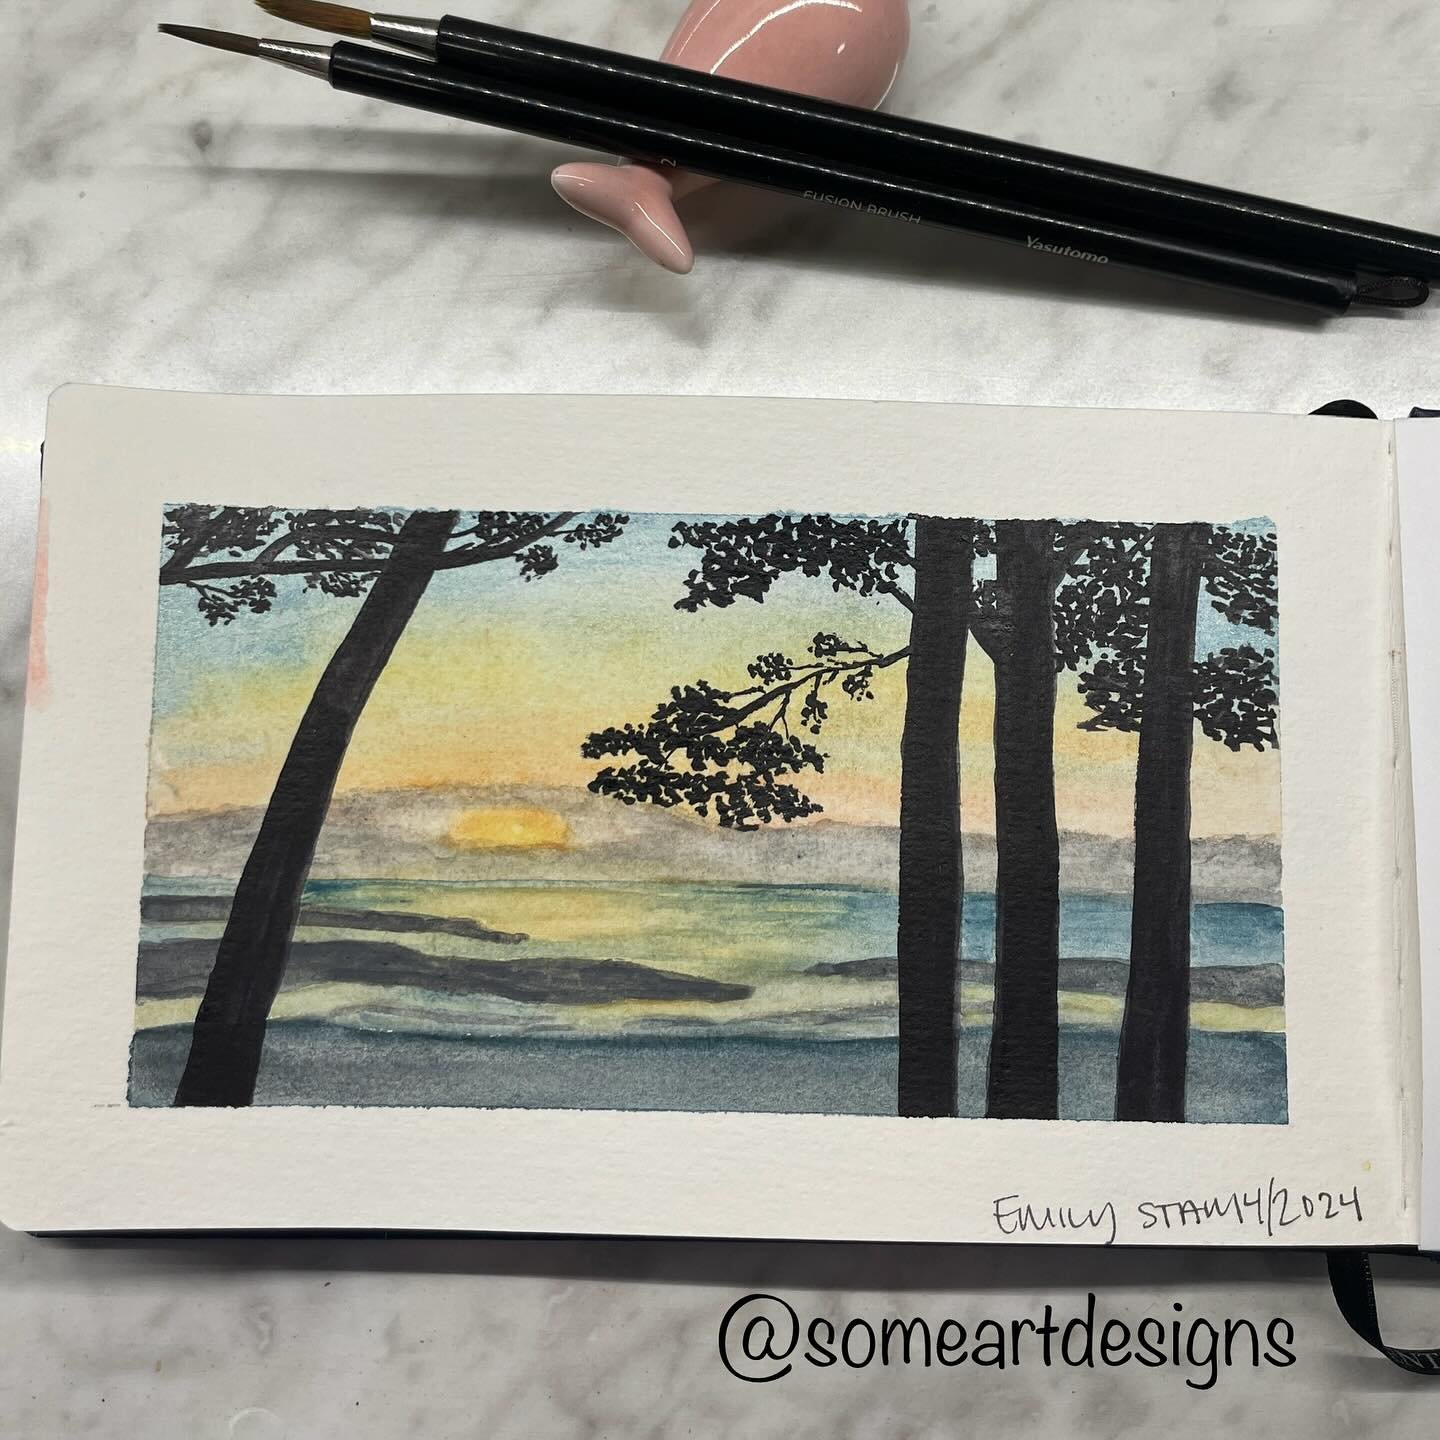 April&rsquo;s paint-along challenged me&hellip;as usual. I learned a lot. I sure do love being a part of this art community! I learn so much from them. 

#aprilpaintalong #amberandfriendspaintalong
#watercolorartist
#mixedmediaartist

@colorsbymaura 